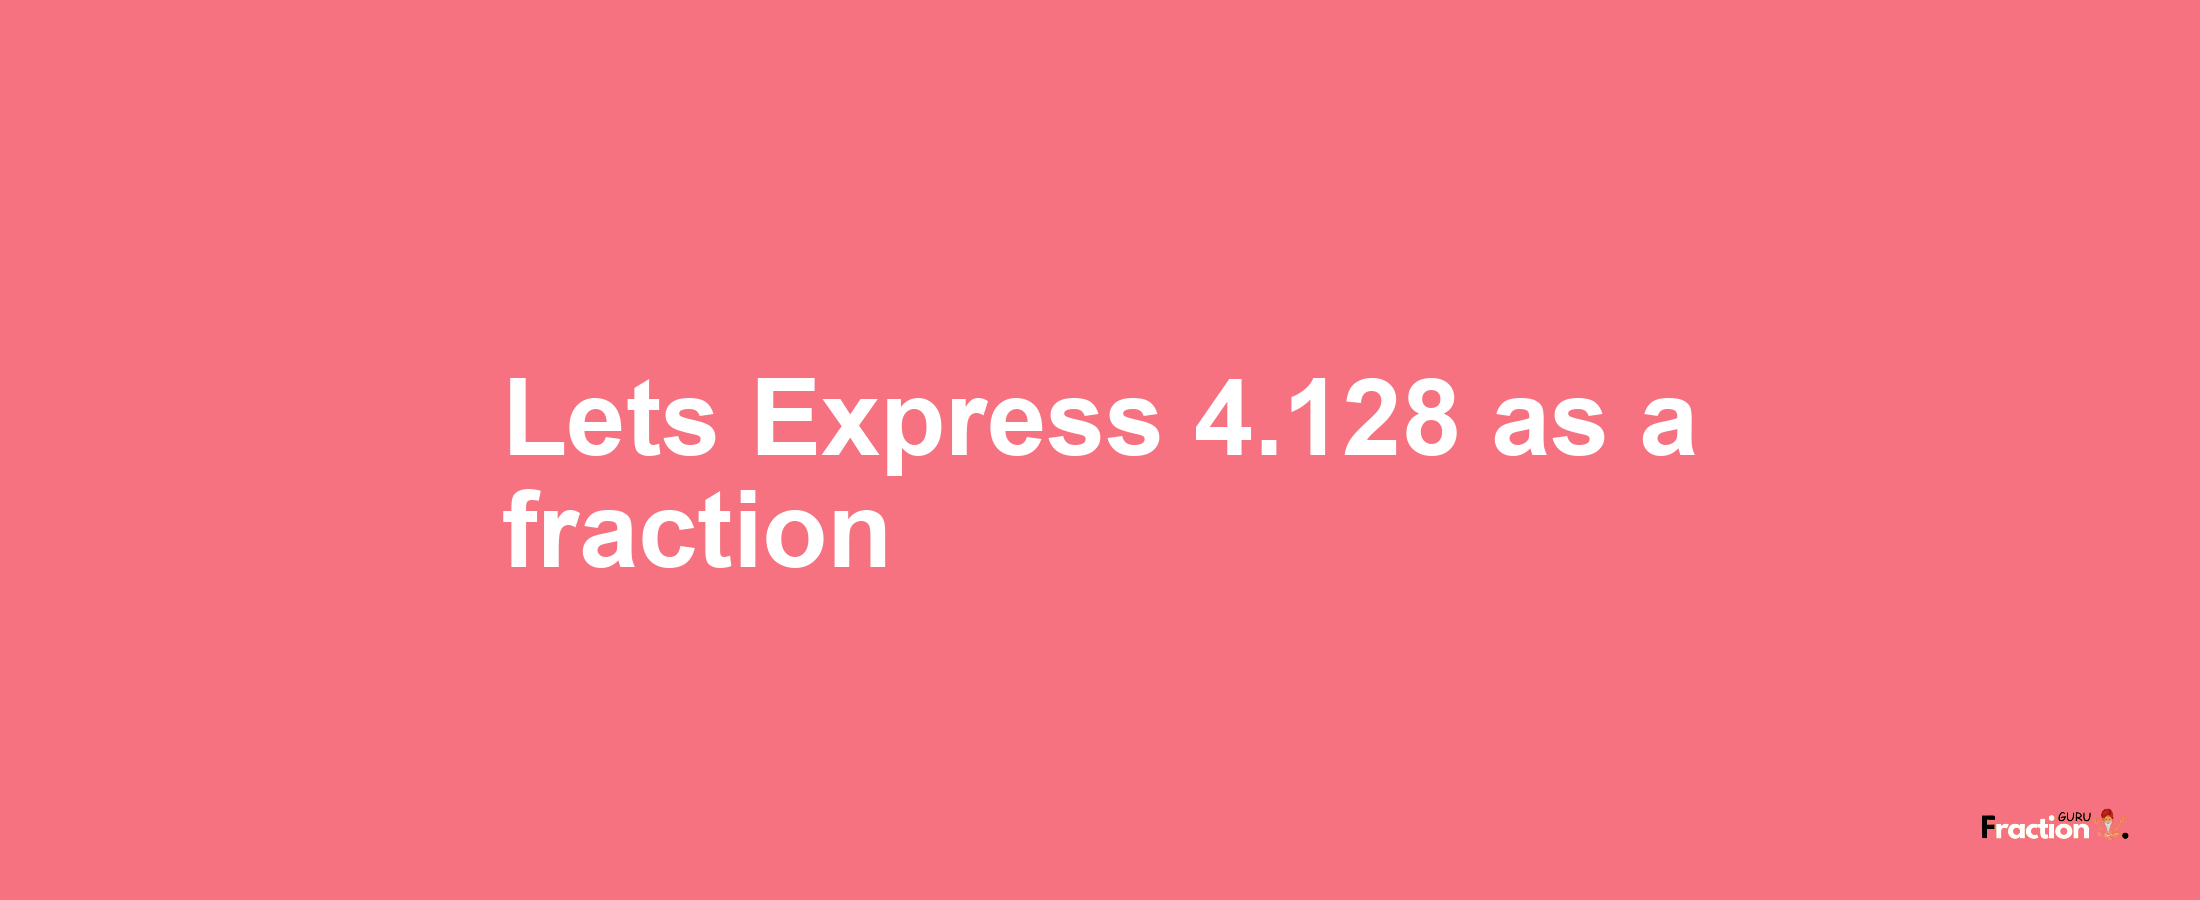 Lets Express 4.128 as afraction